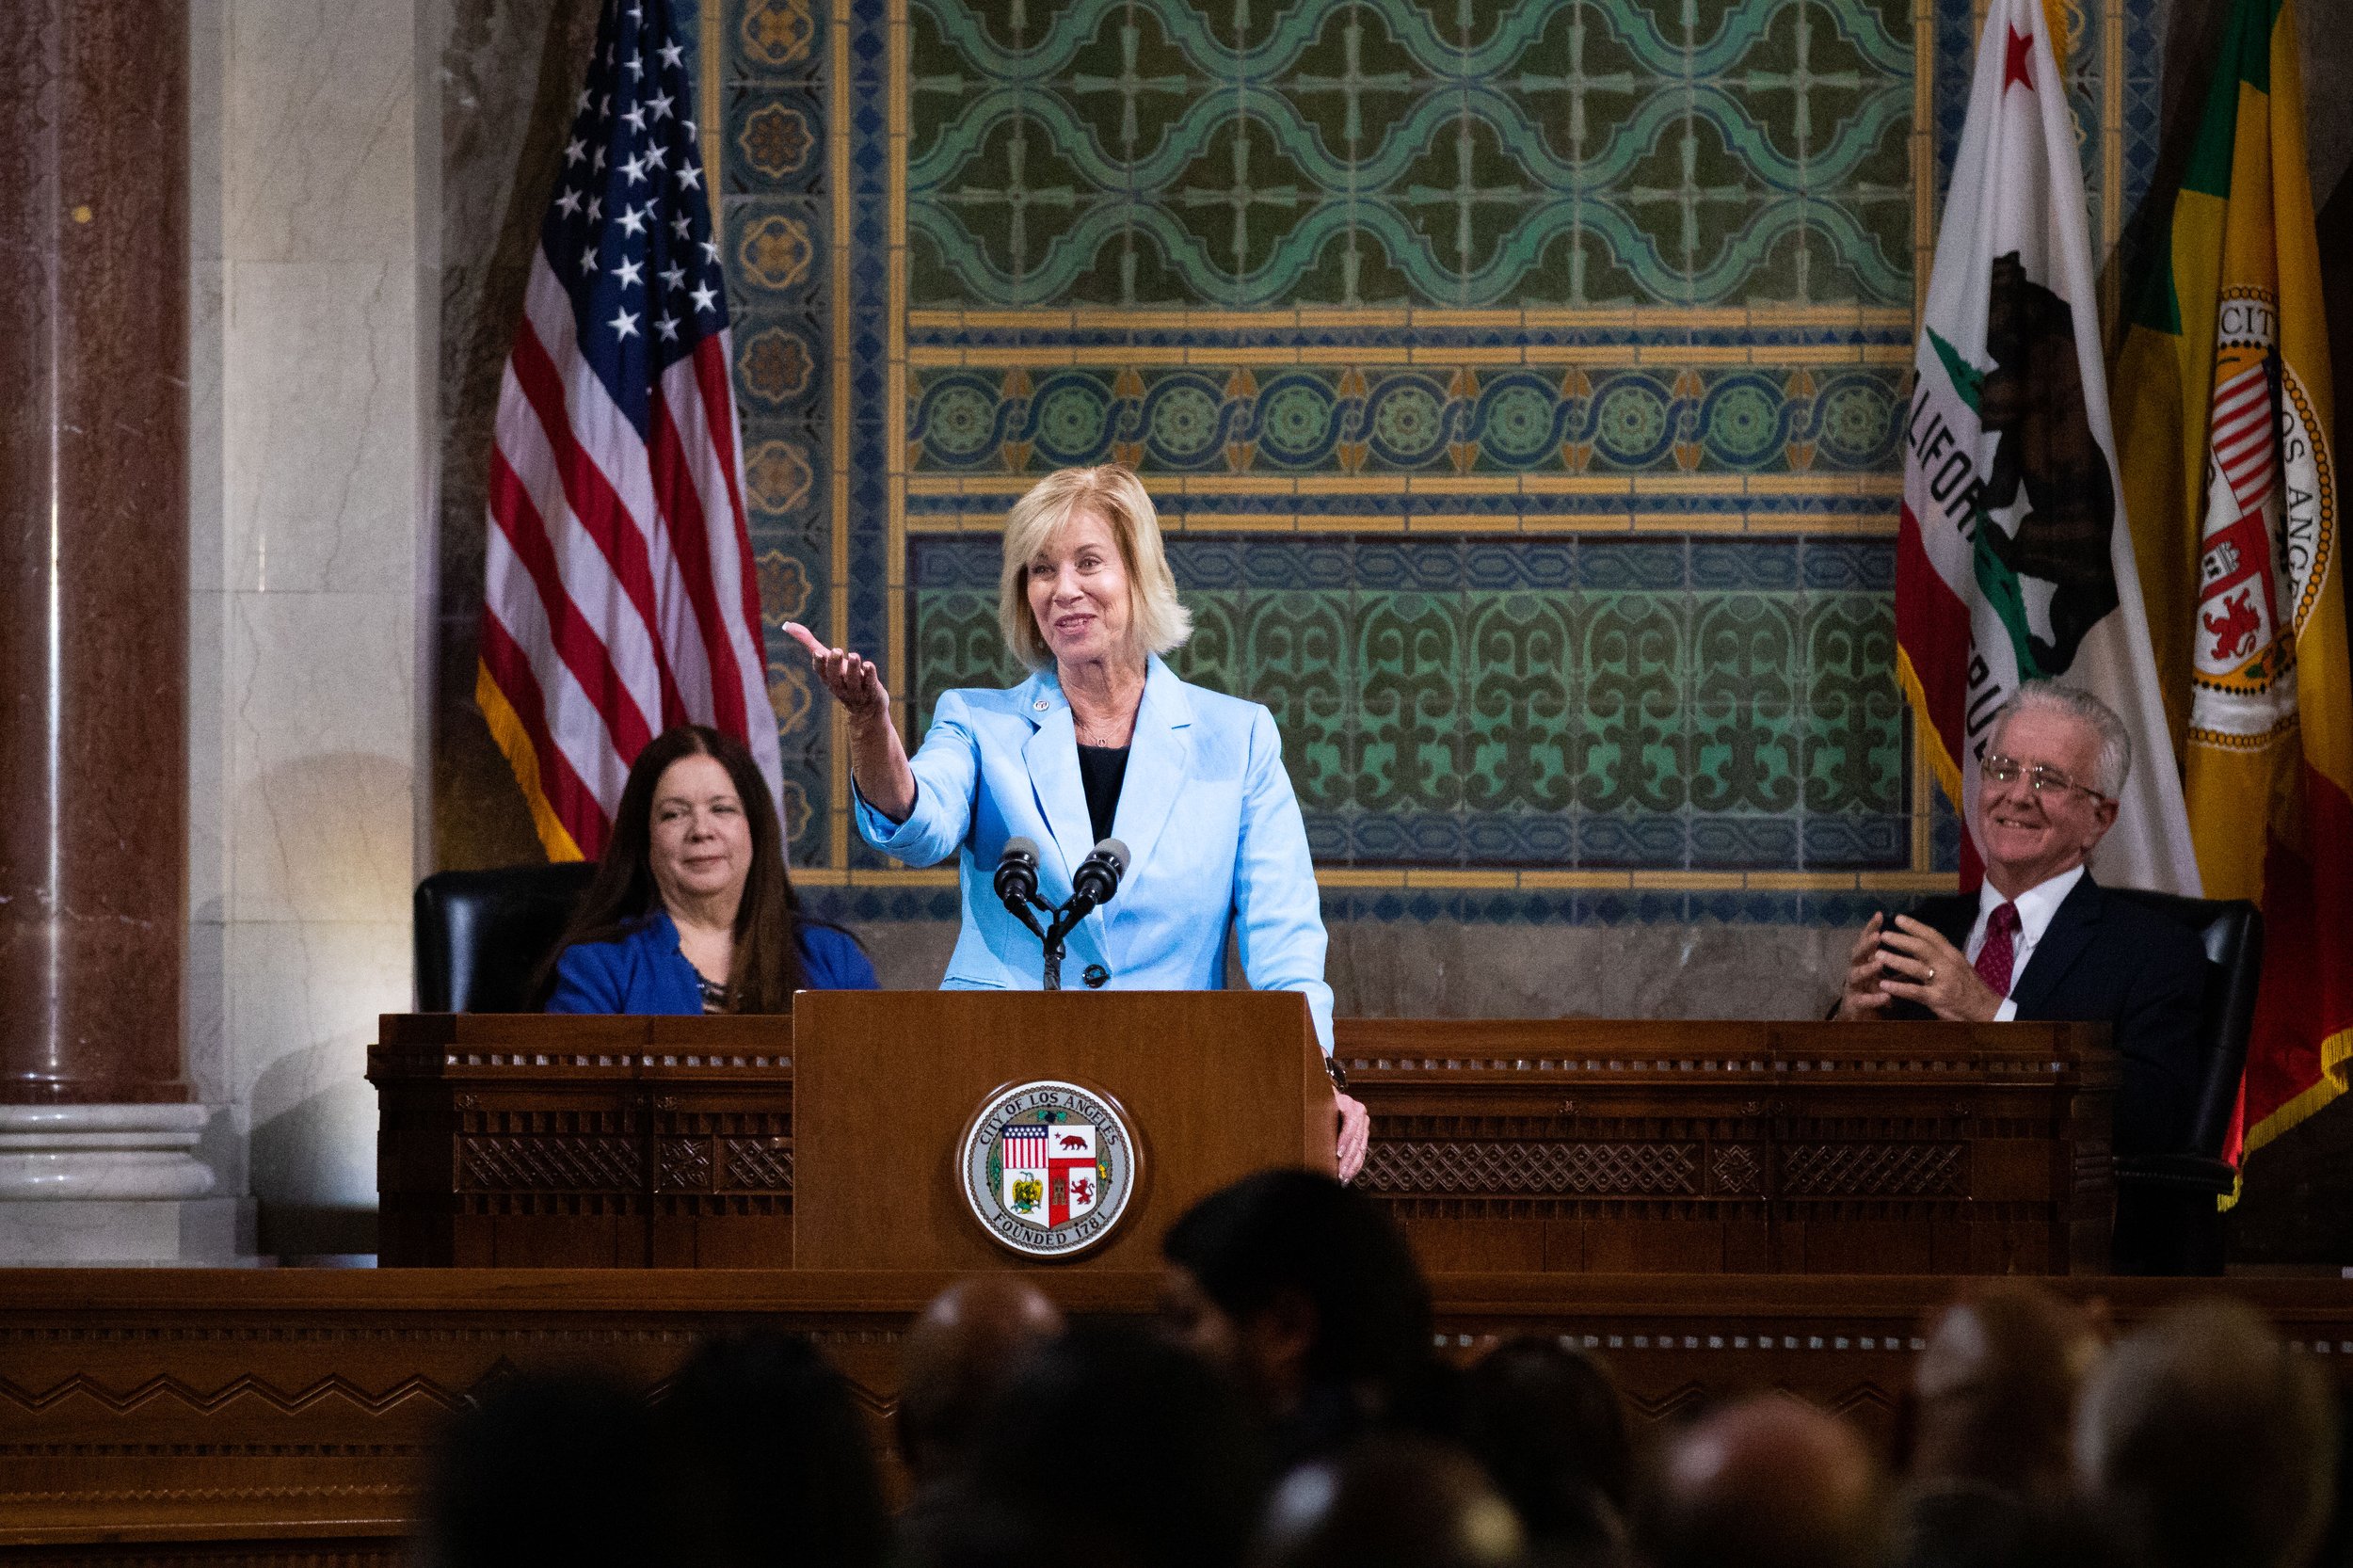  Chair of the Los Angeles County Board of Supervisors Janice Hahn (district 4) speaks before Mayor Karen Bass delivers her first State of the City address in the Council Chambers, in Los Angeles City Hall, Los Angeles, Calif., on Monday, April 17, 20